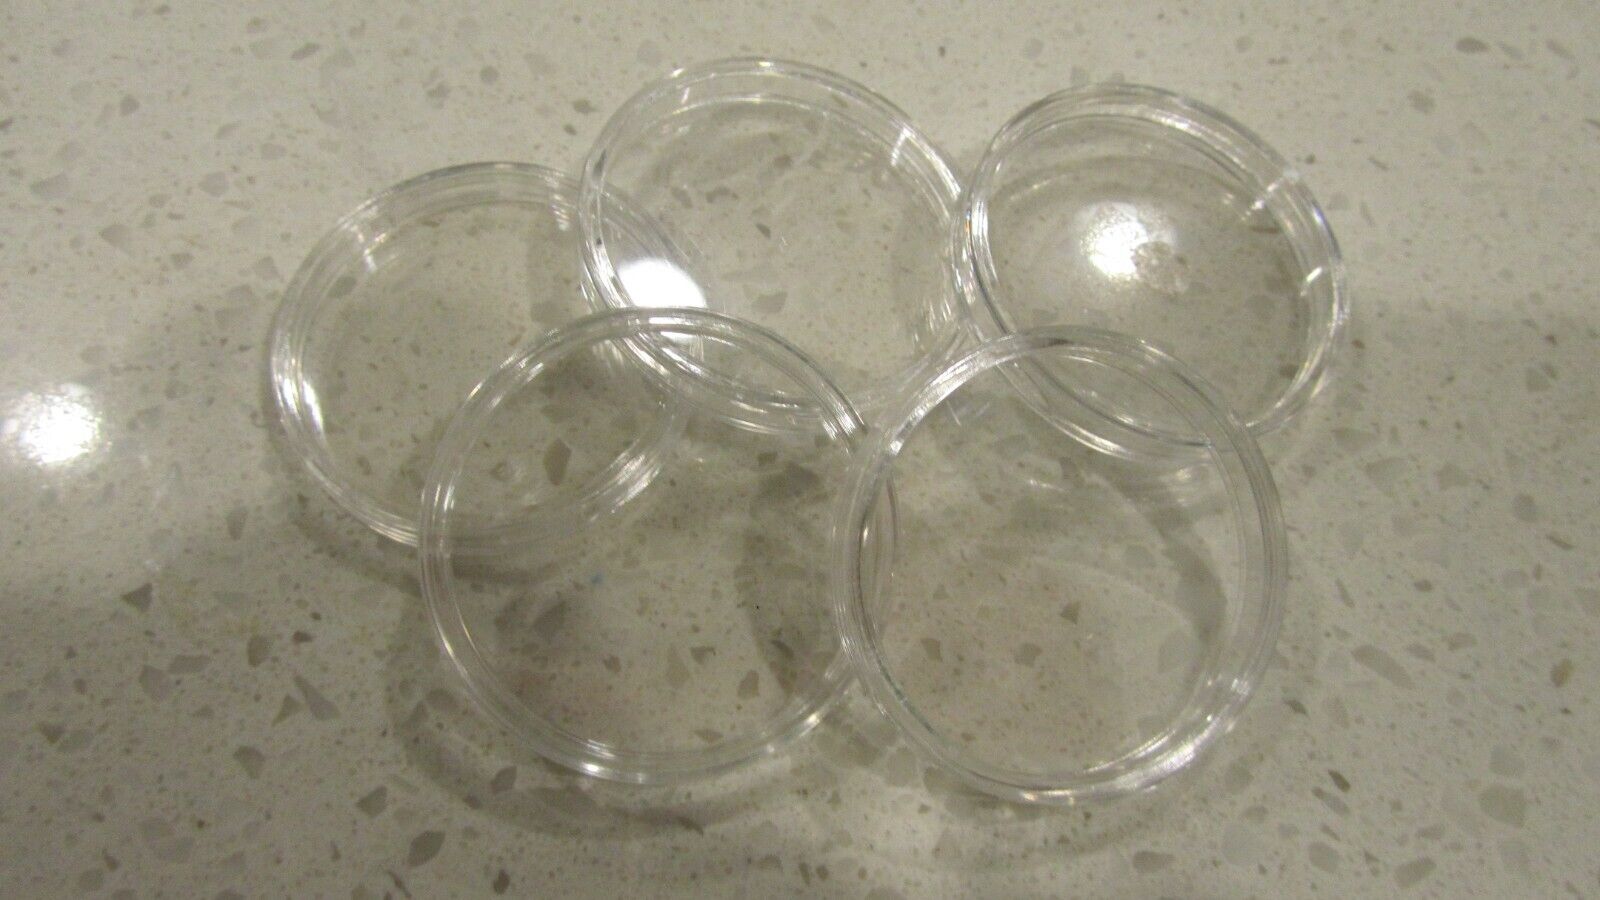 5 Clear 40.6 mm Protector Capsules 2fit Casino Poker Chip 1 oz Silver Eagle Coin